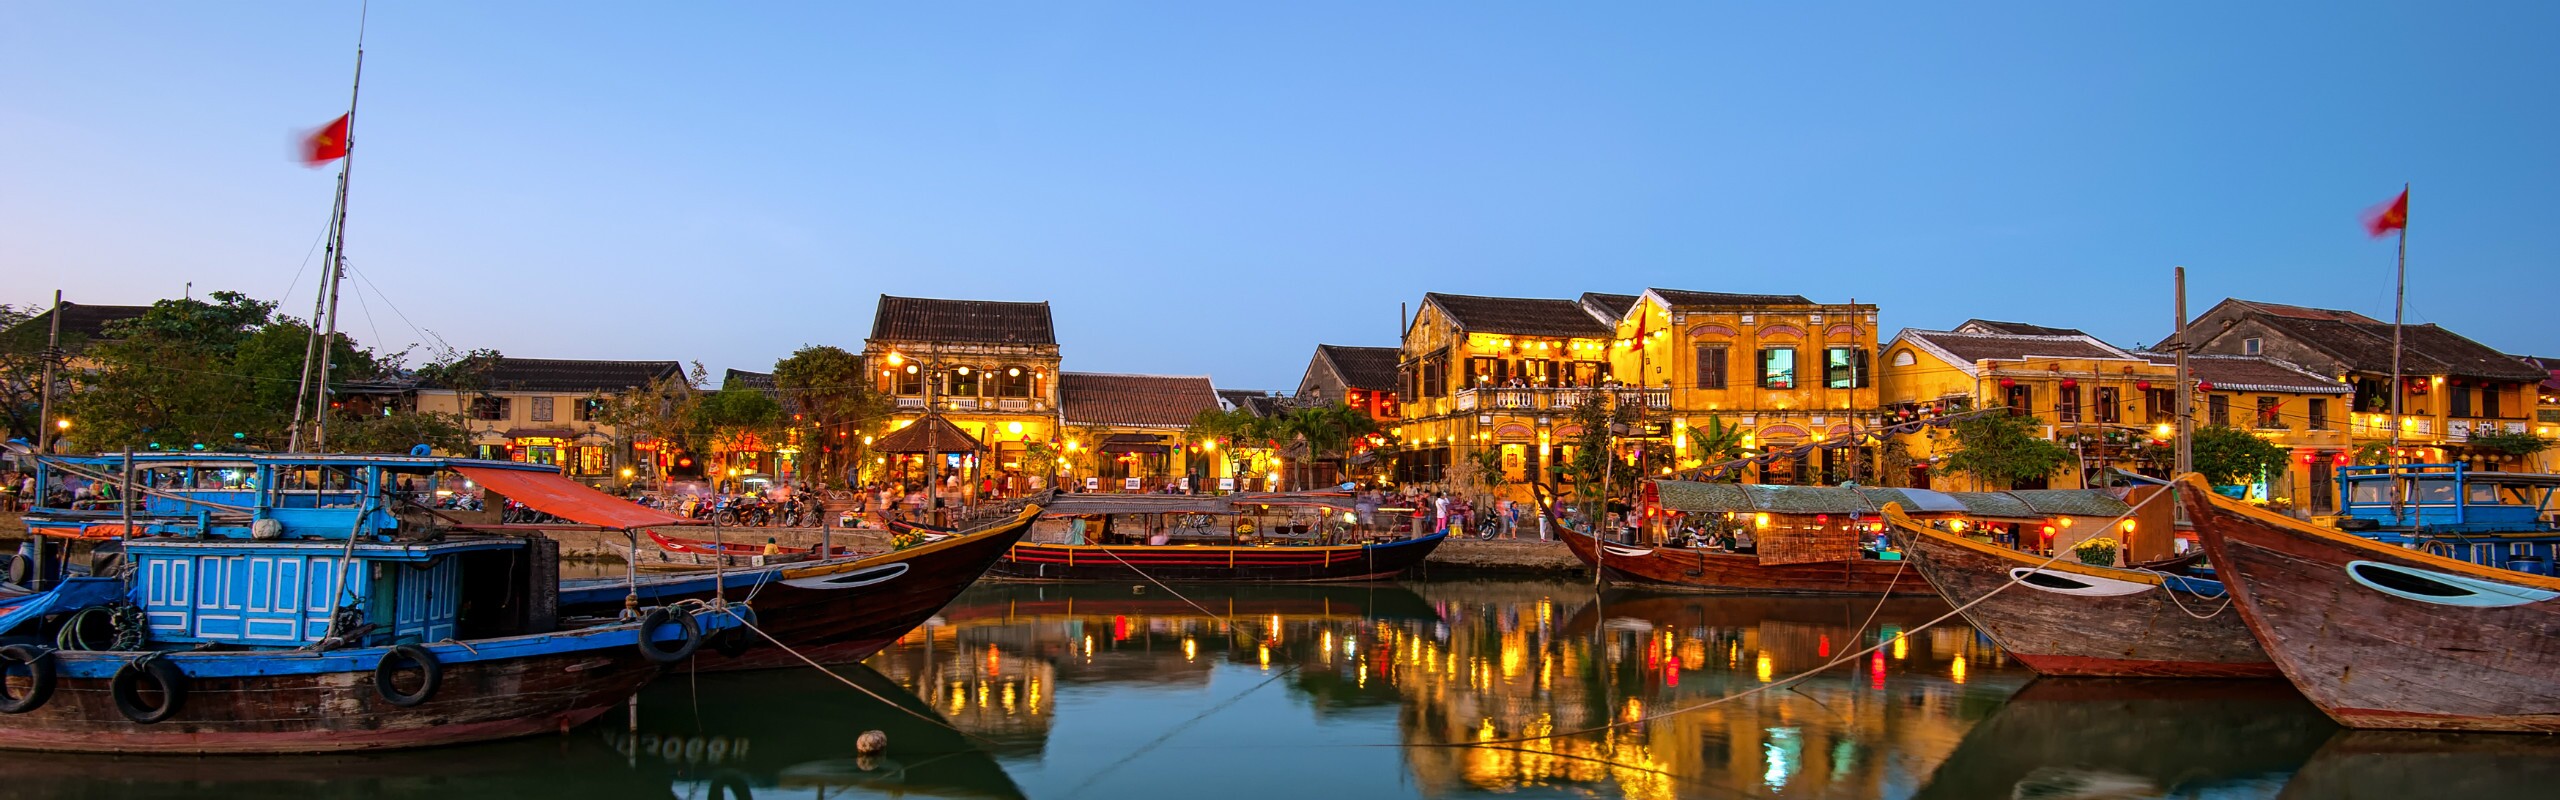 Guide to Hoi An Ancient Town